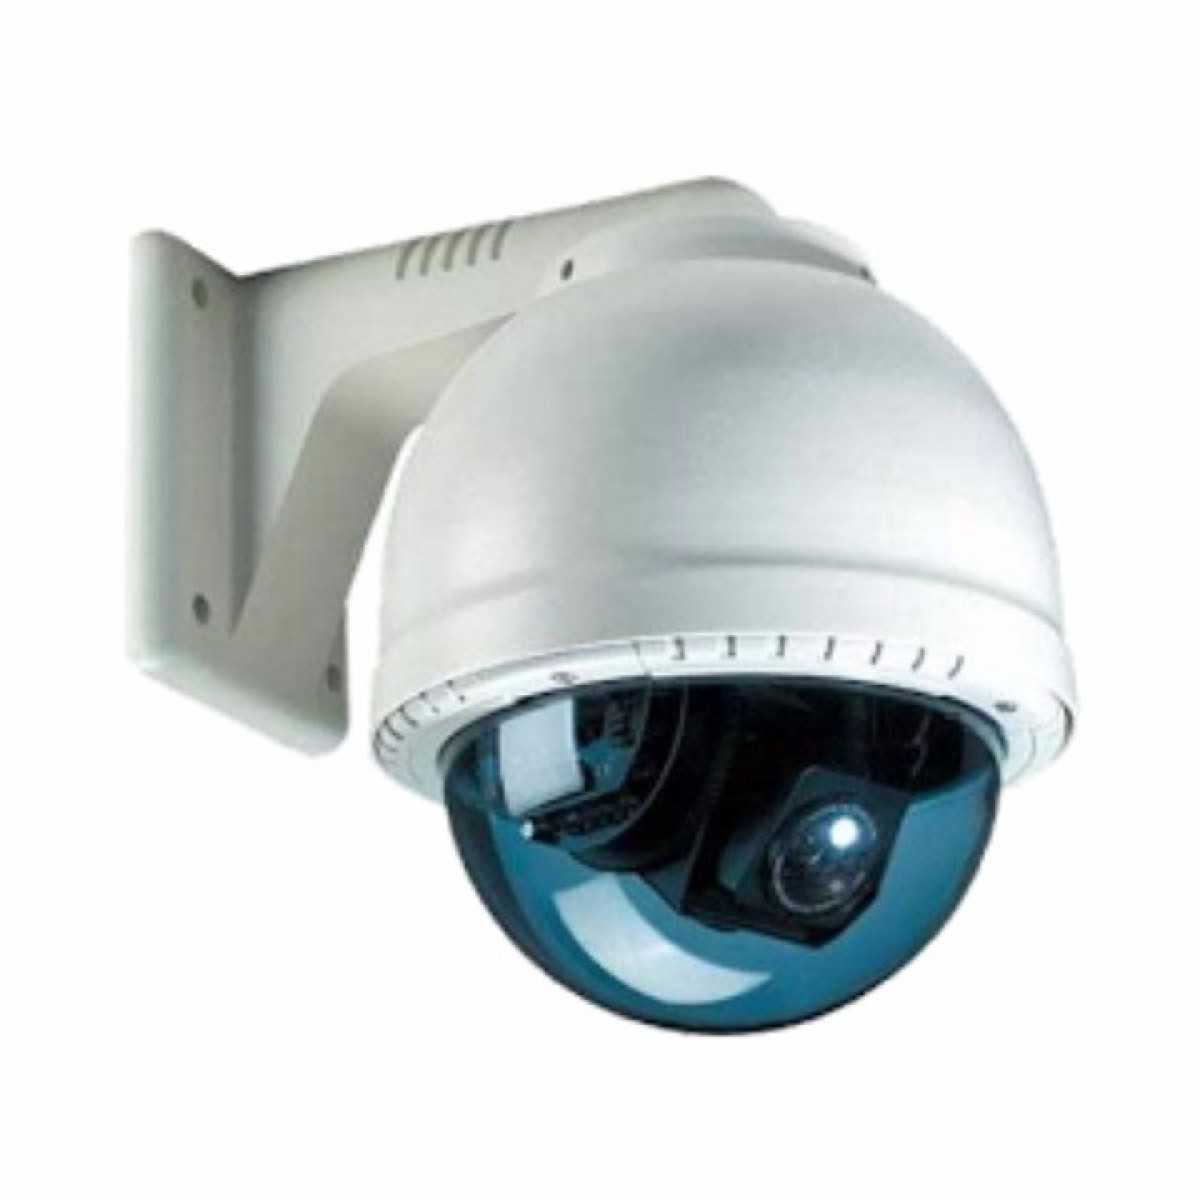 IP Cam Viewer Pro v7.0.8 (Patched) Apk